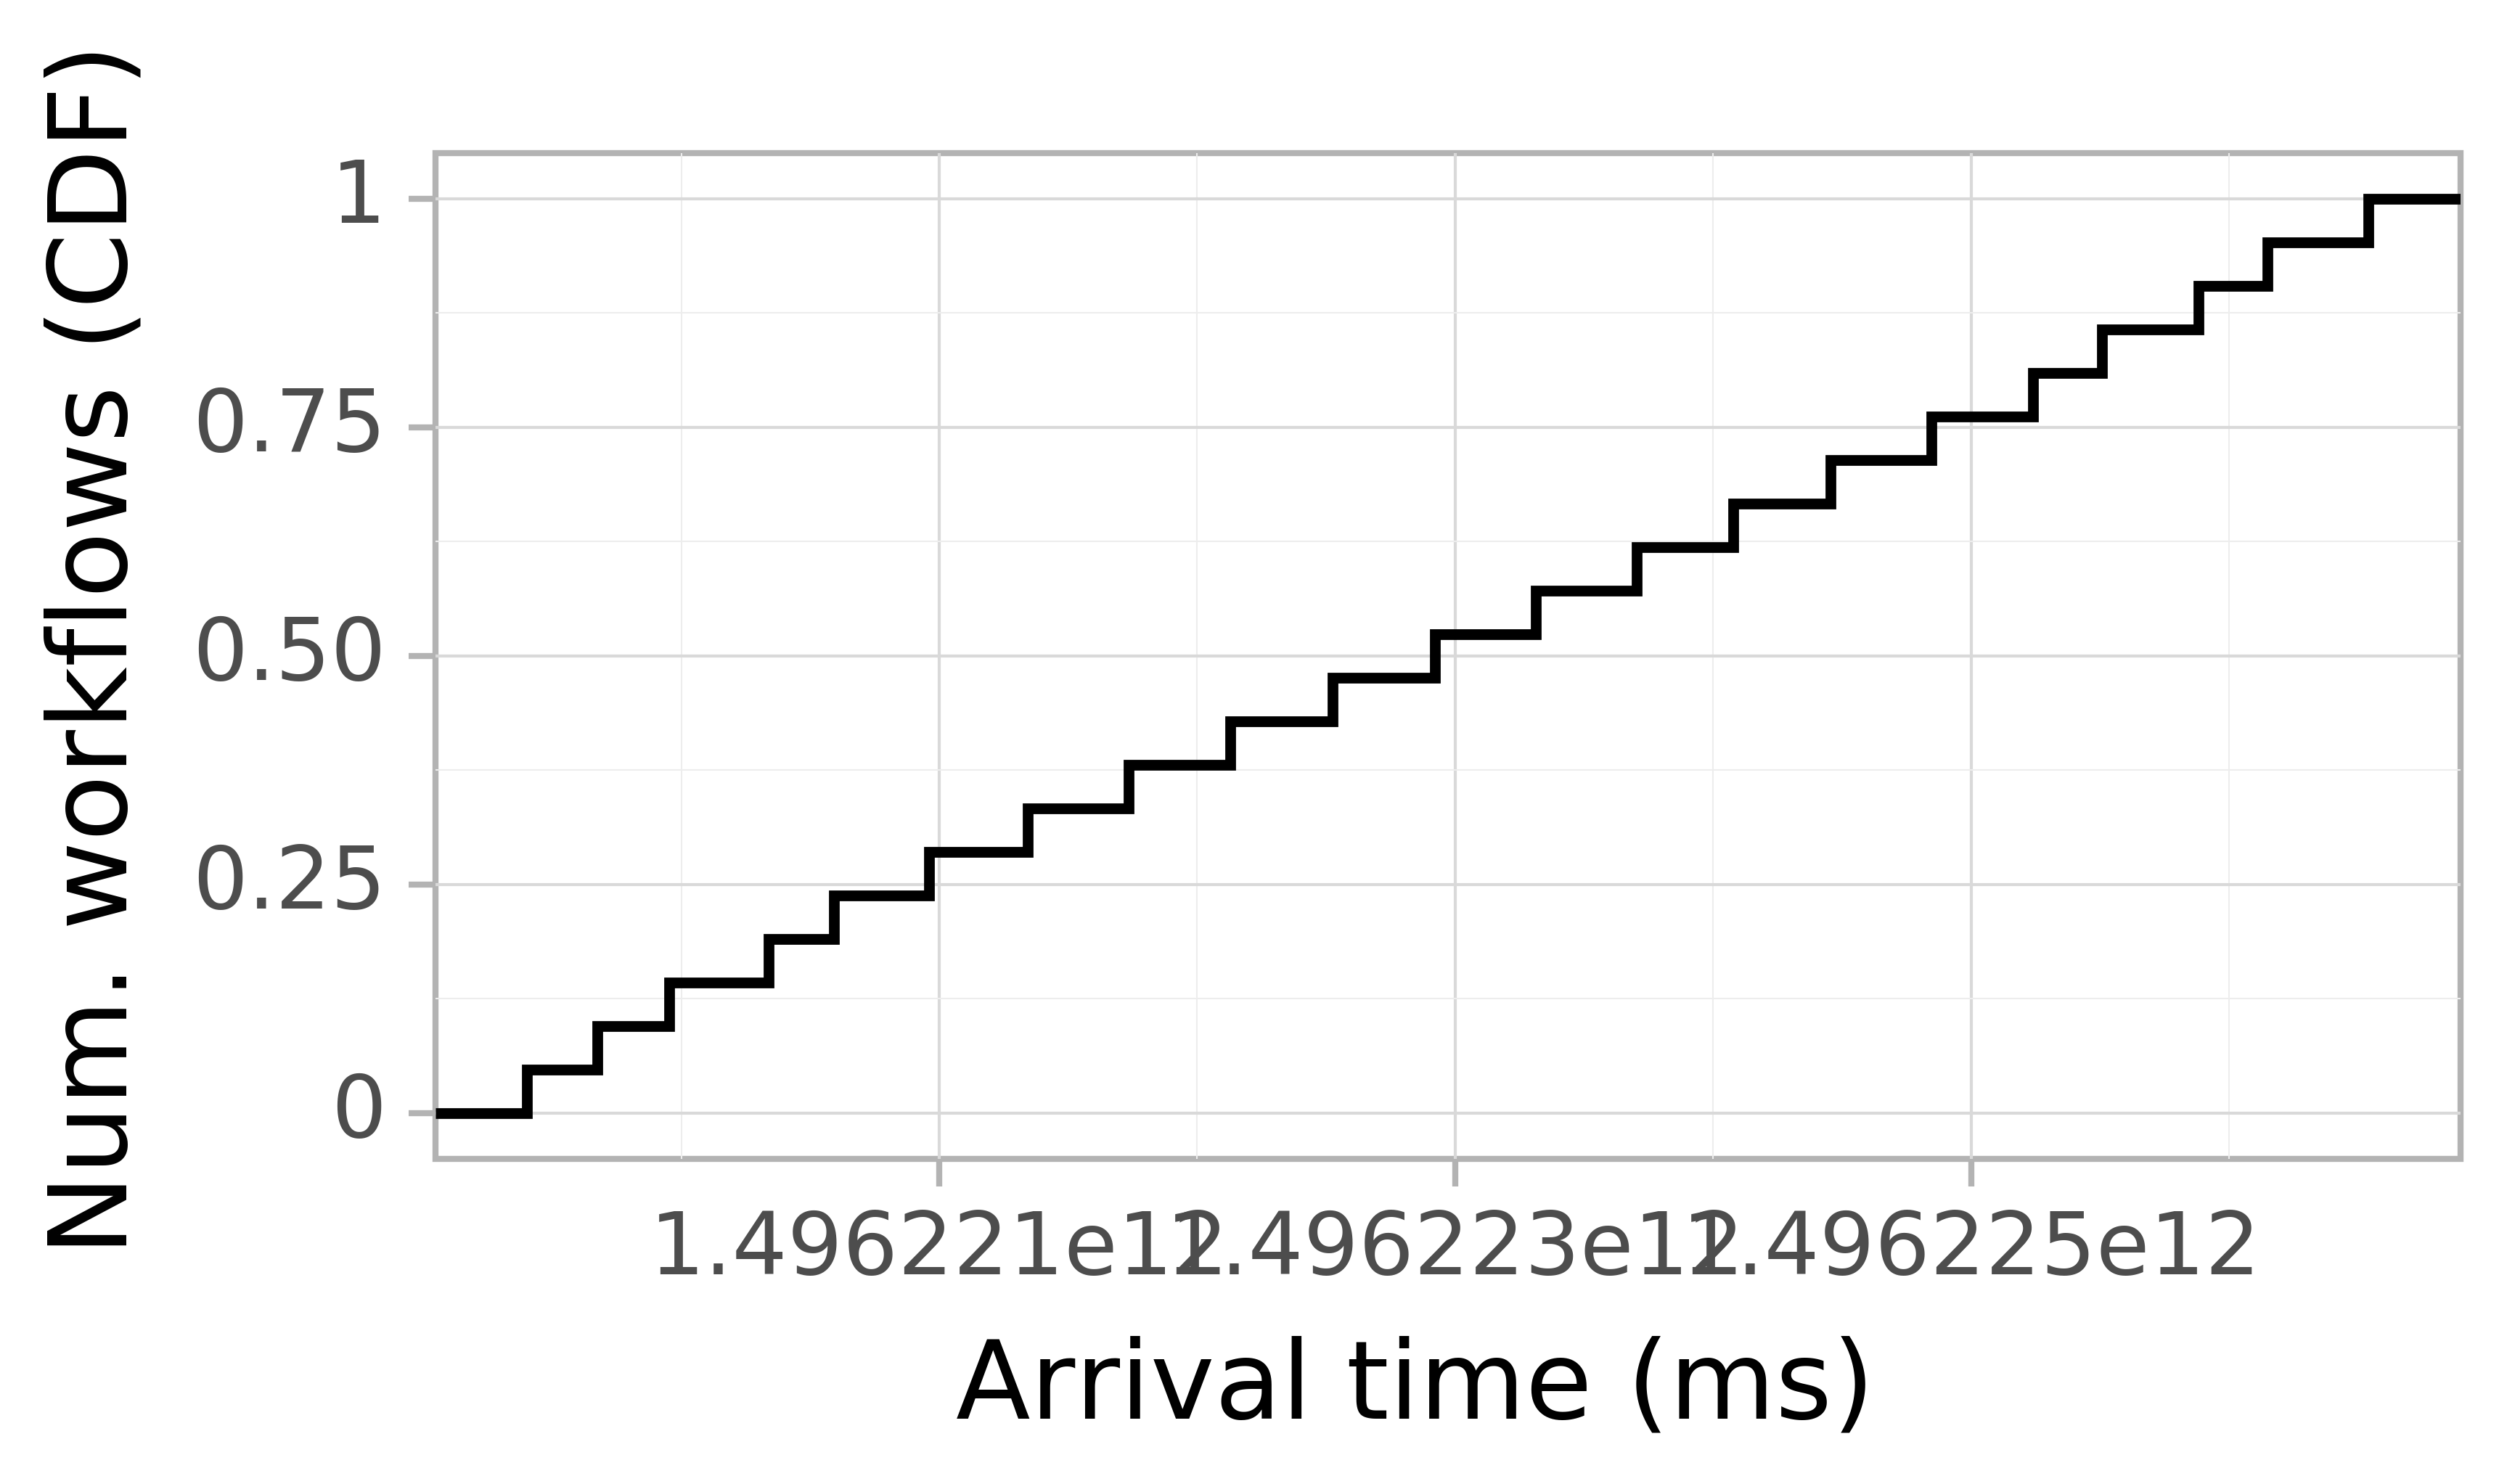 Job arrival CDF graph for the askalon-new_ee63 trace.